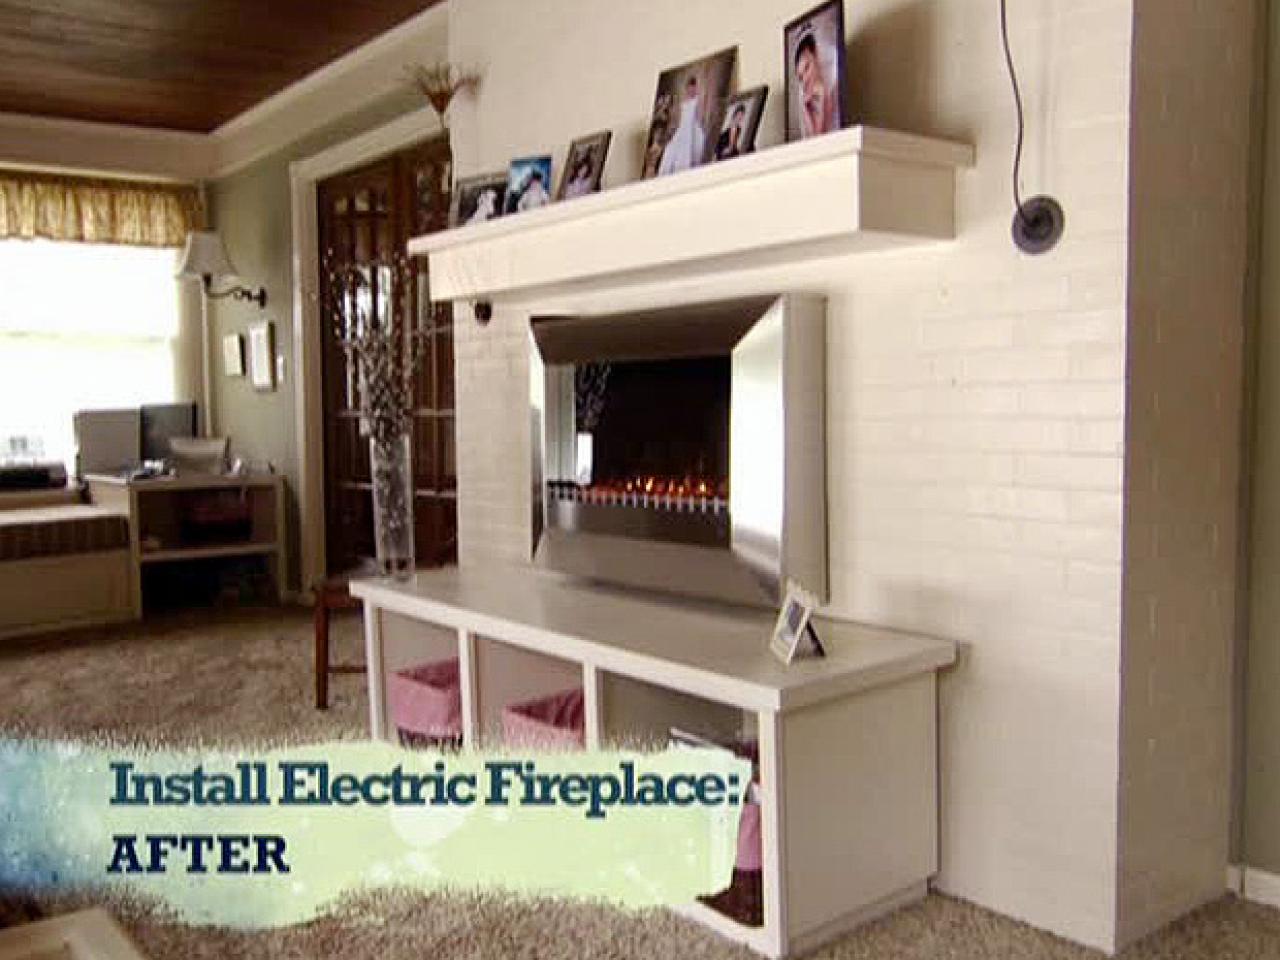 Learn how to add instant warmth to your home by installing an electric fireplace.